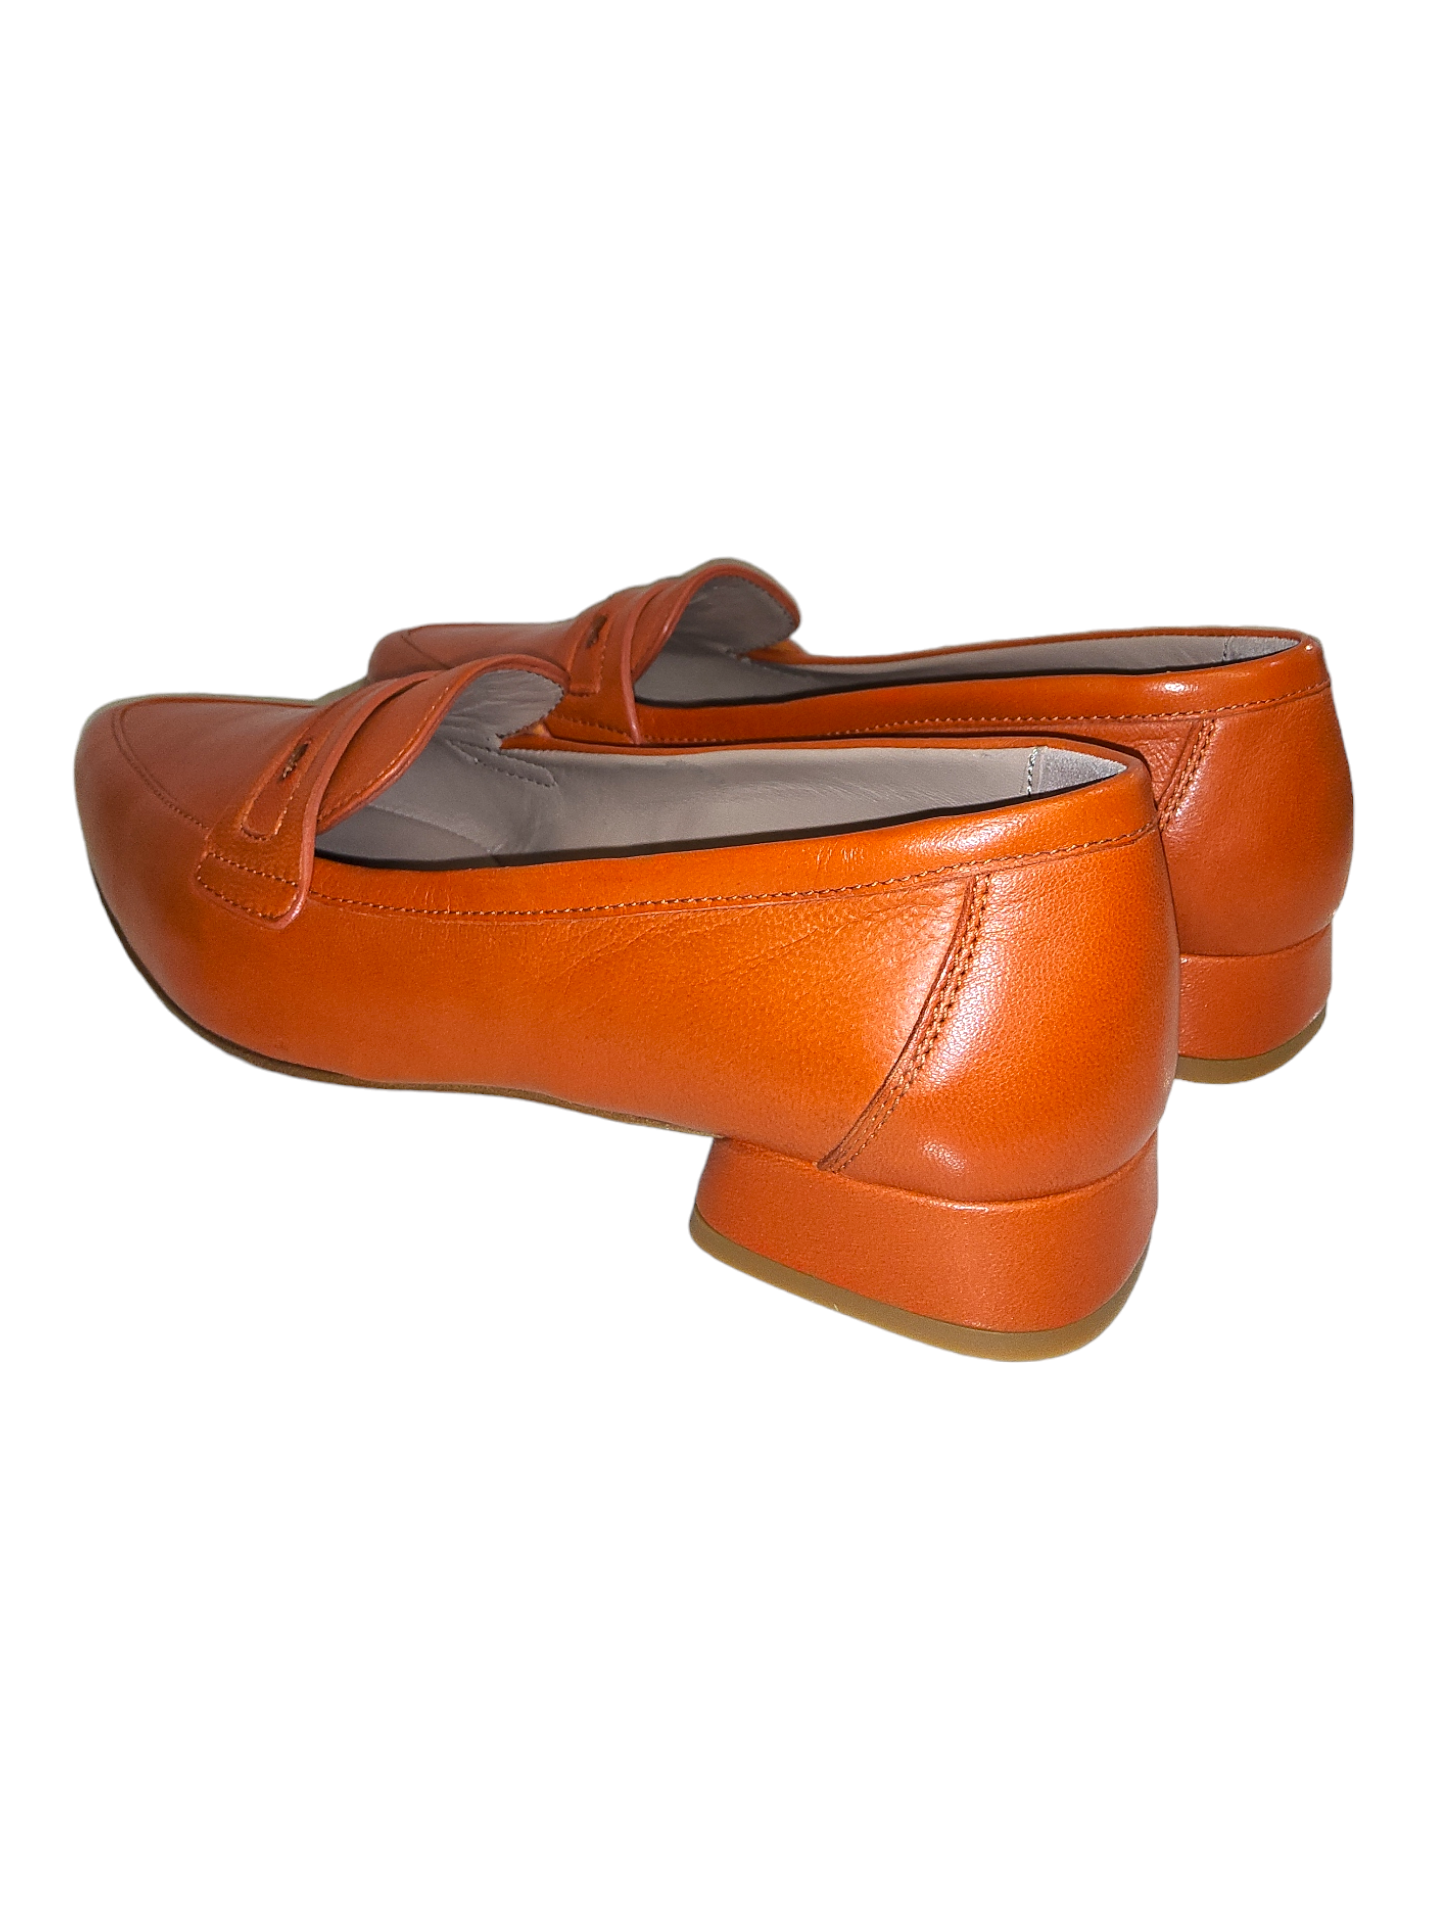 Orange leather loafers